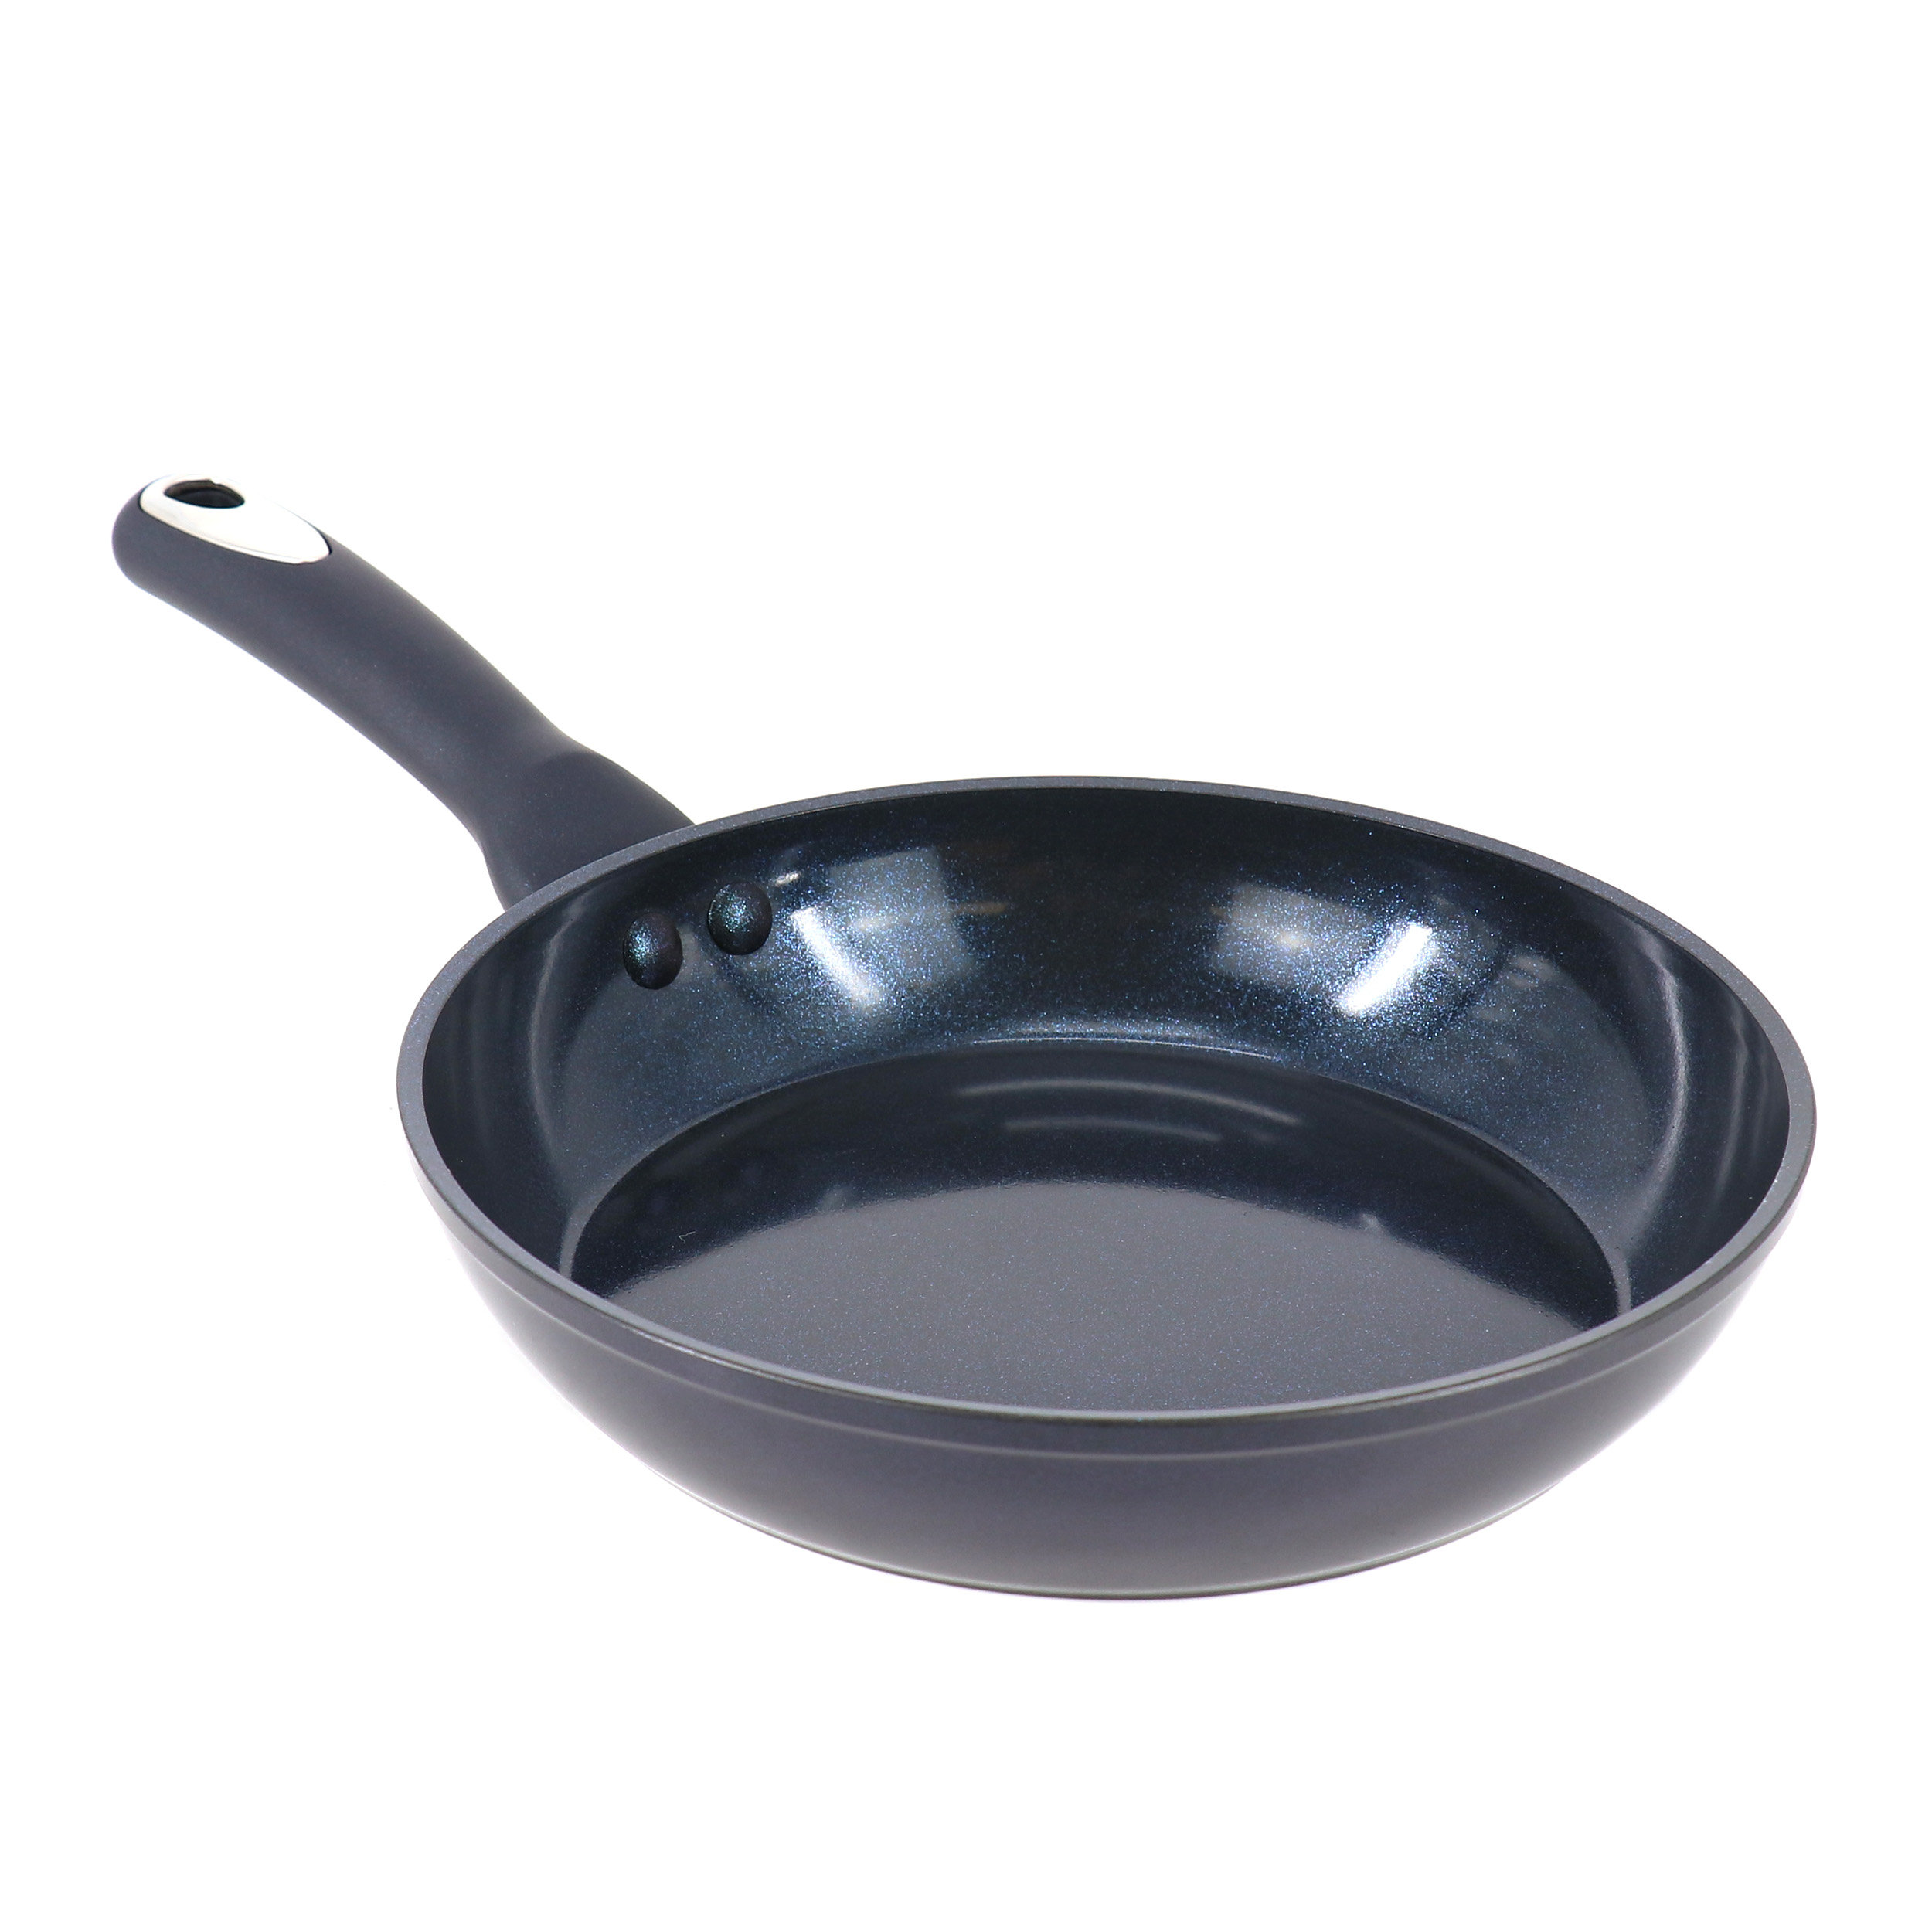 Style Nonstick Cookware Frying Pan, 11.25-Inch, Blue